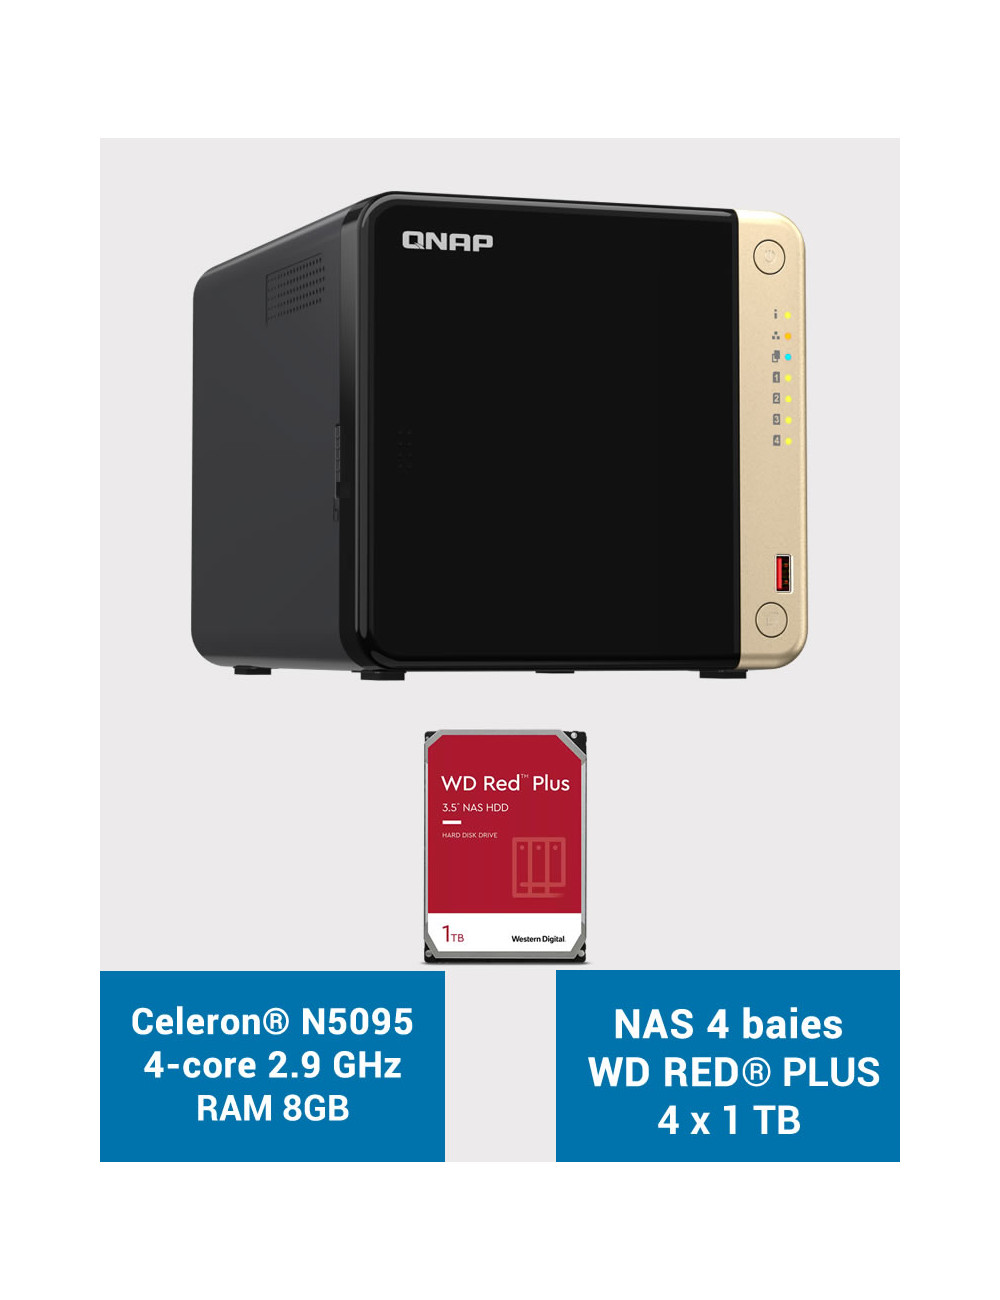 QNAP TS-464 8GB Serveur NAS 4 baies WD RED PLUS 4To (4x1To)